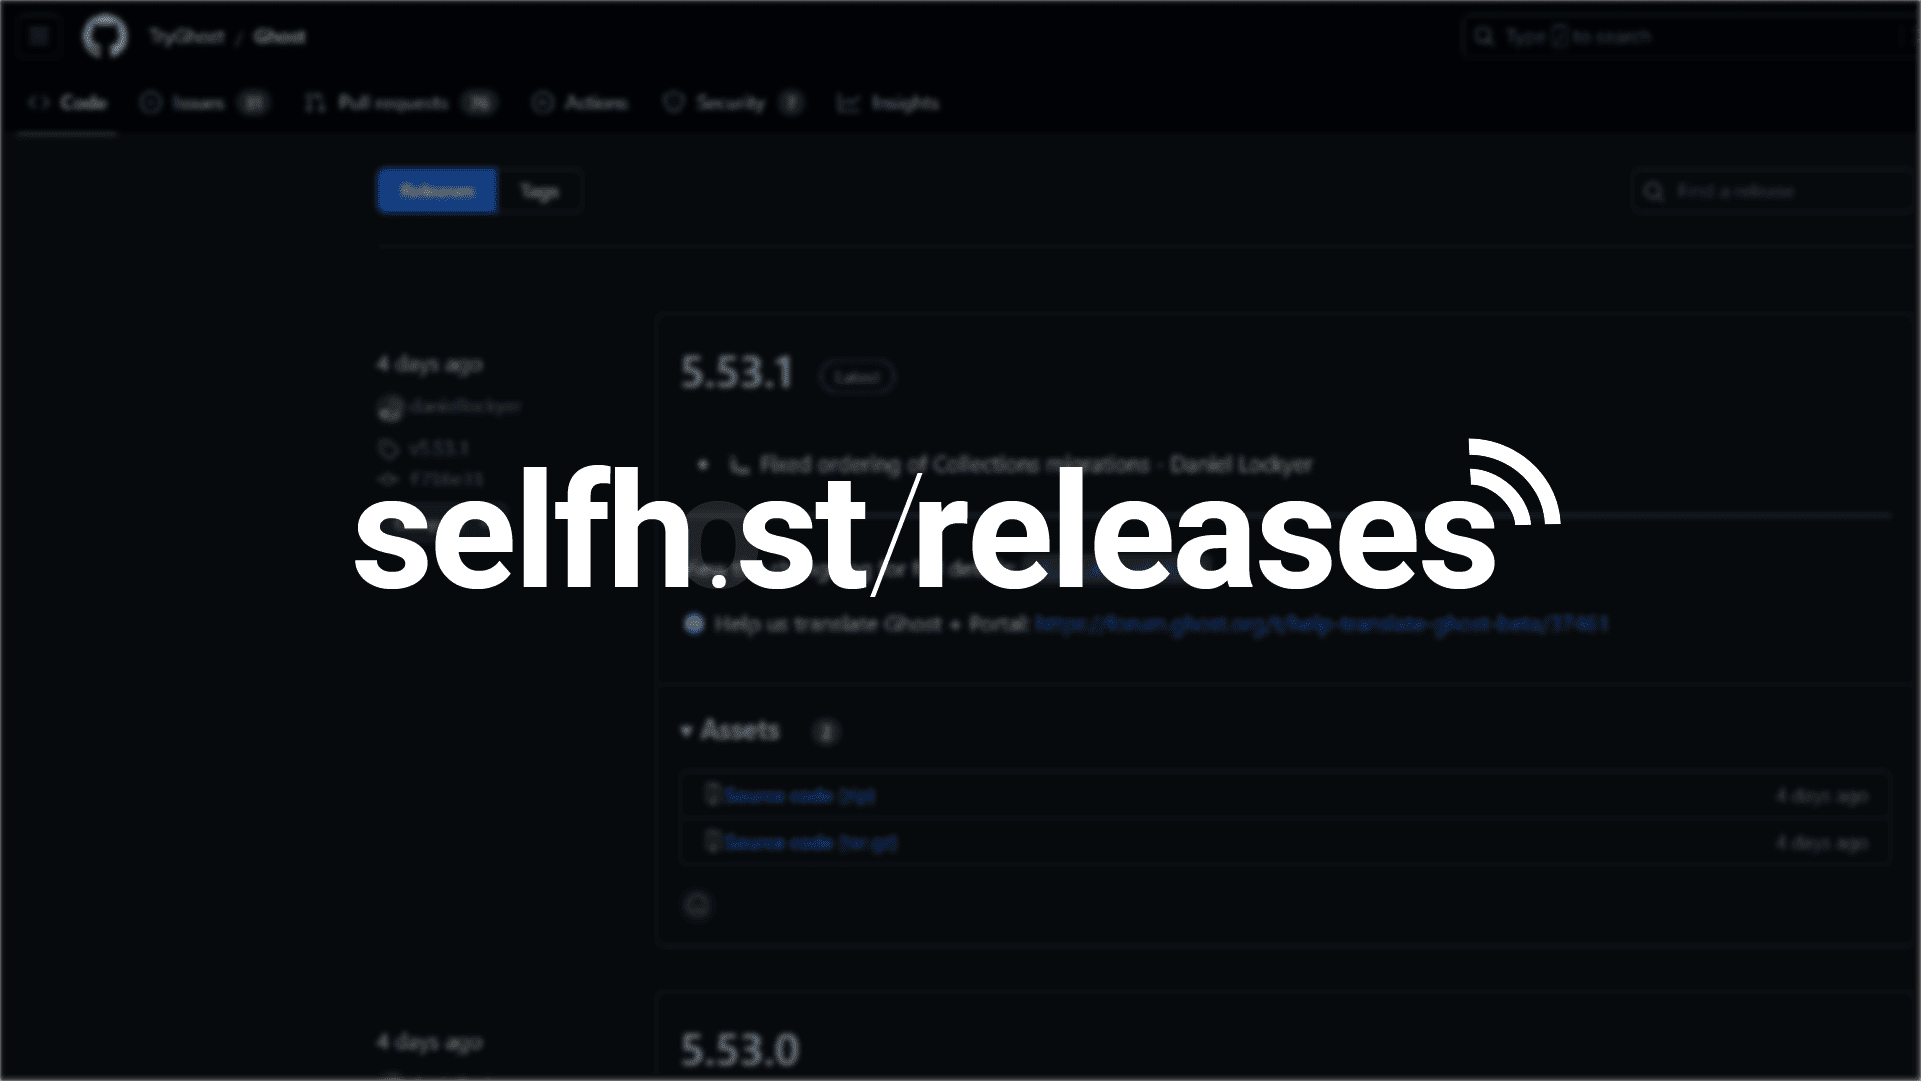 Introducing selfh.st/releases, a Collection of RSS Release Feeds for Self-Hosted Software Post image